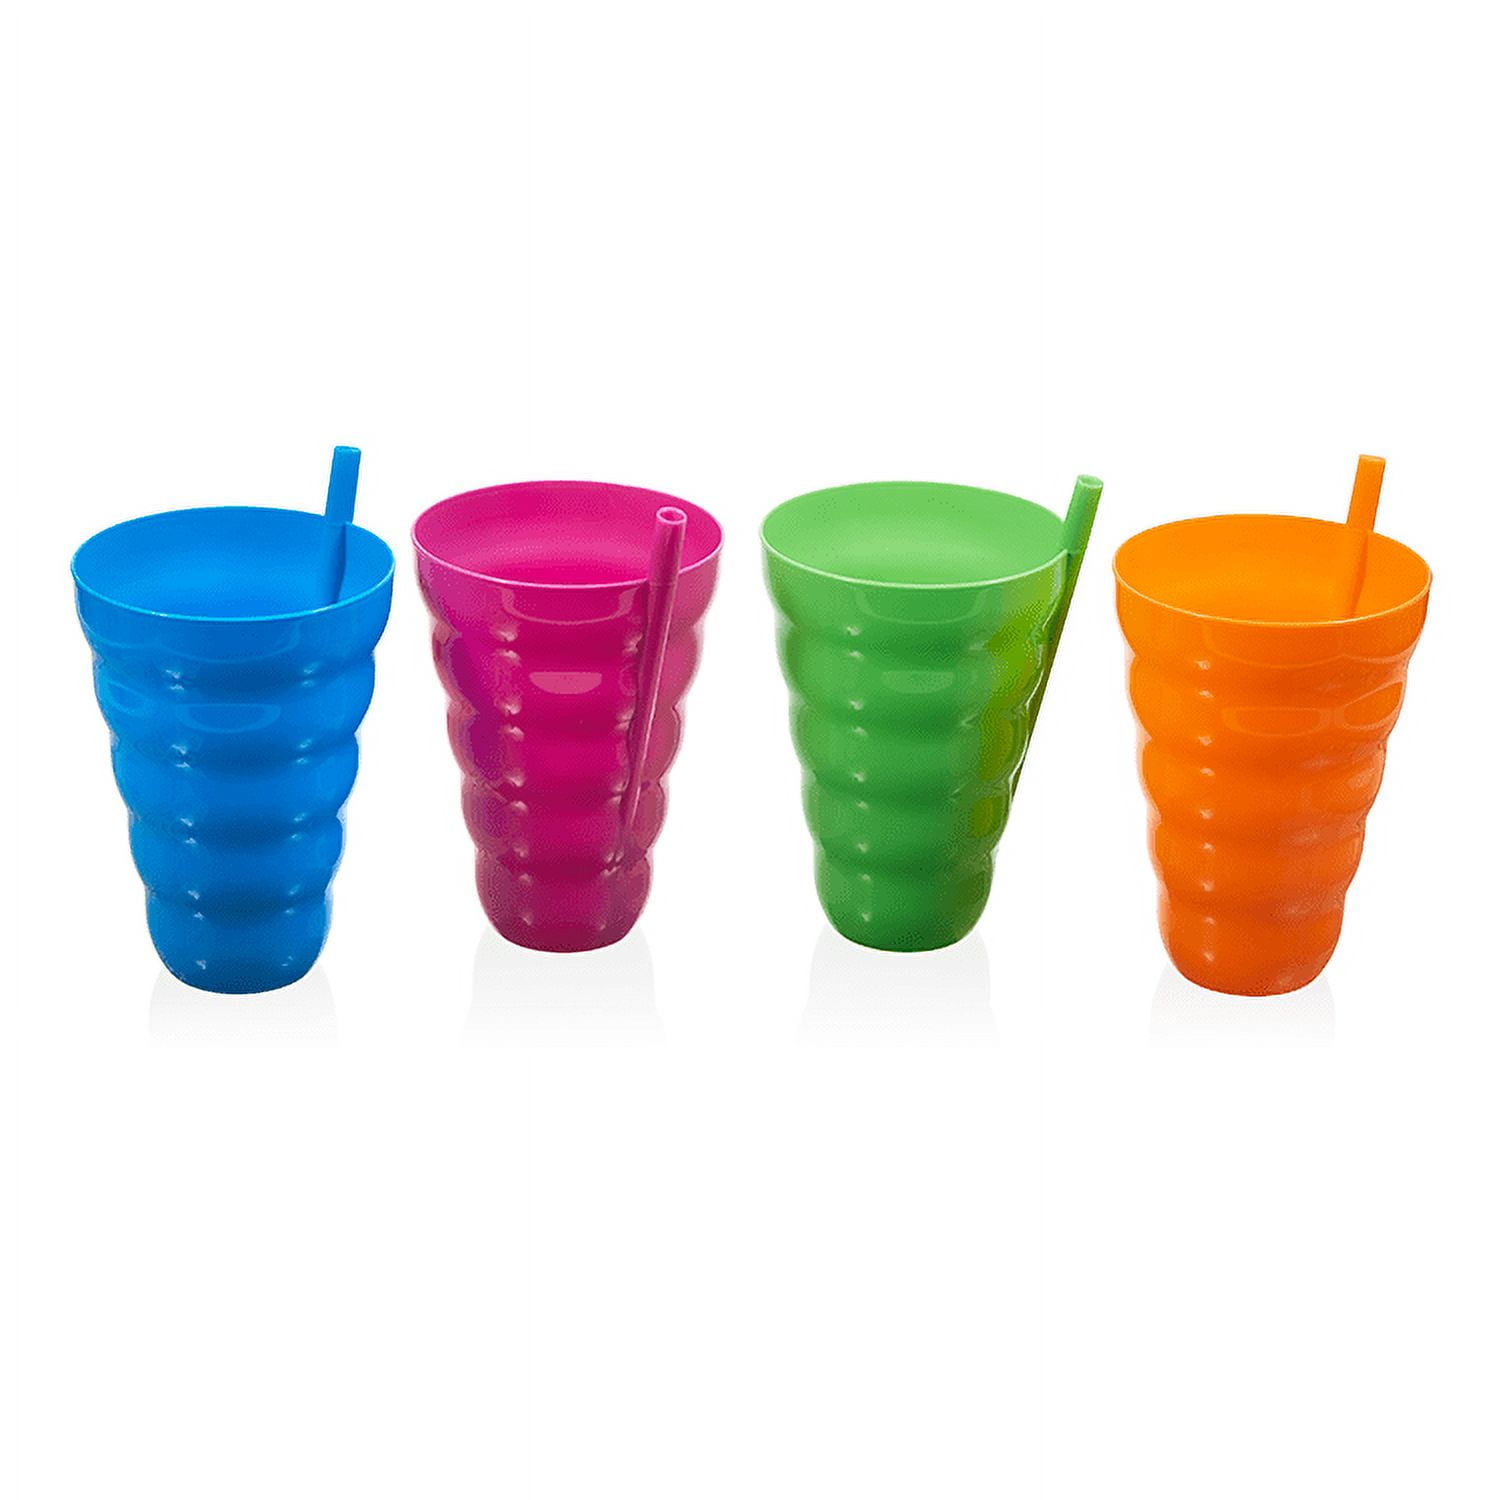 Sip-A-Cup (4-Pack)